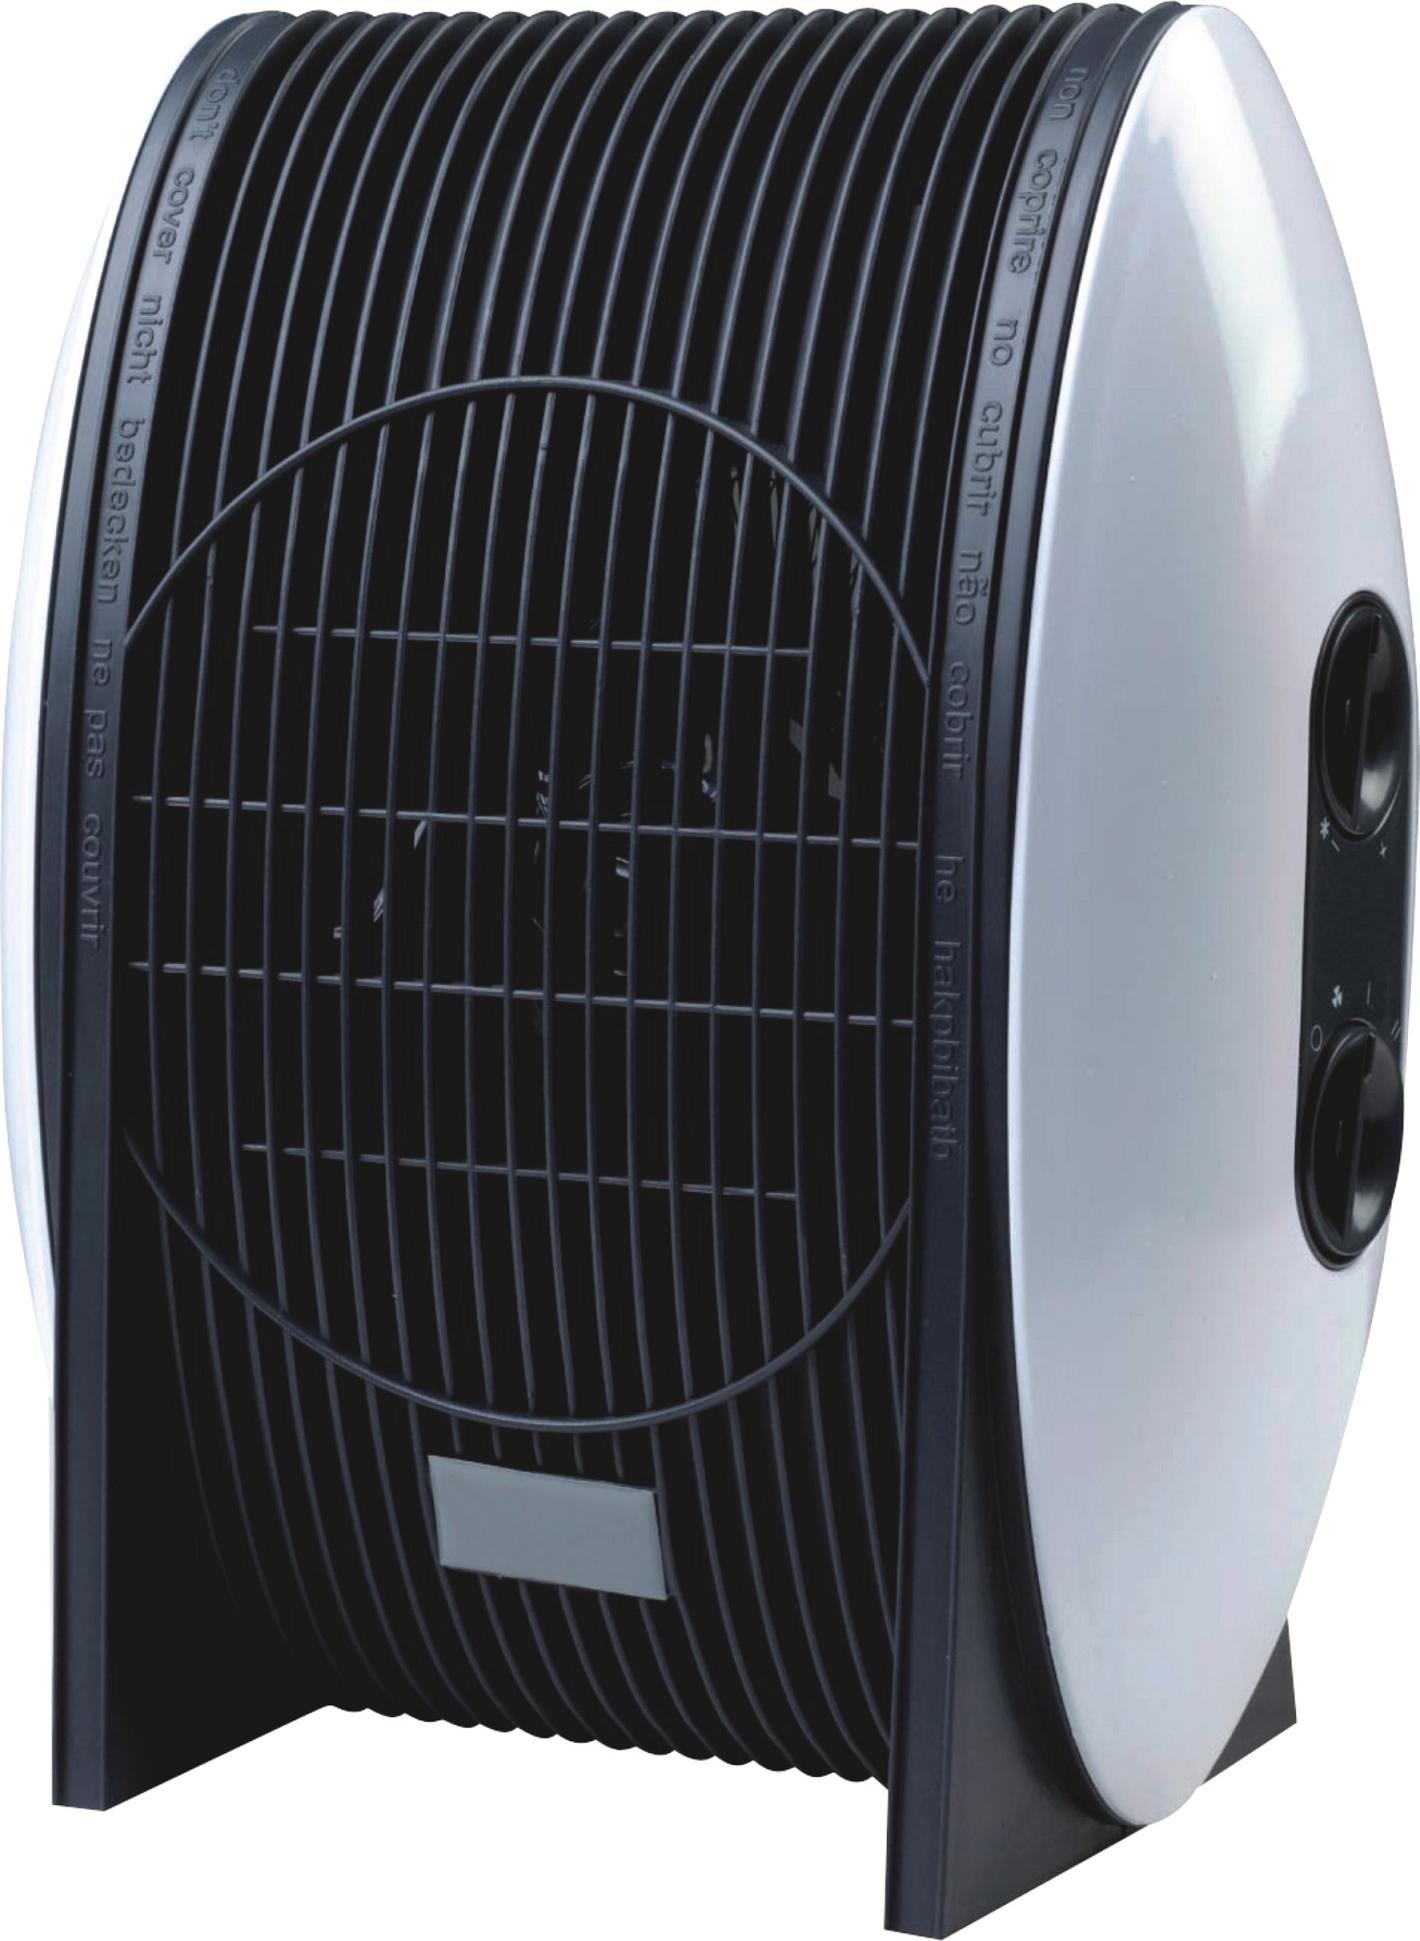 1000/2000W Electric fan heater, portable and easy hand carry